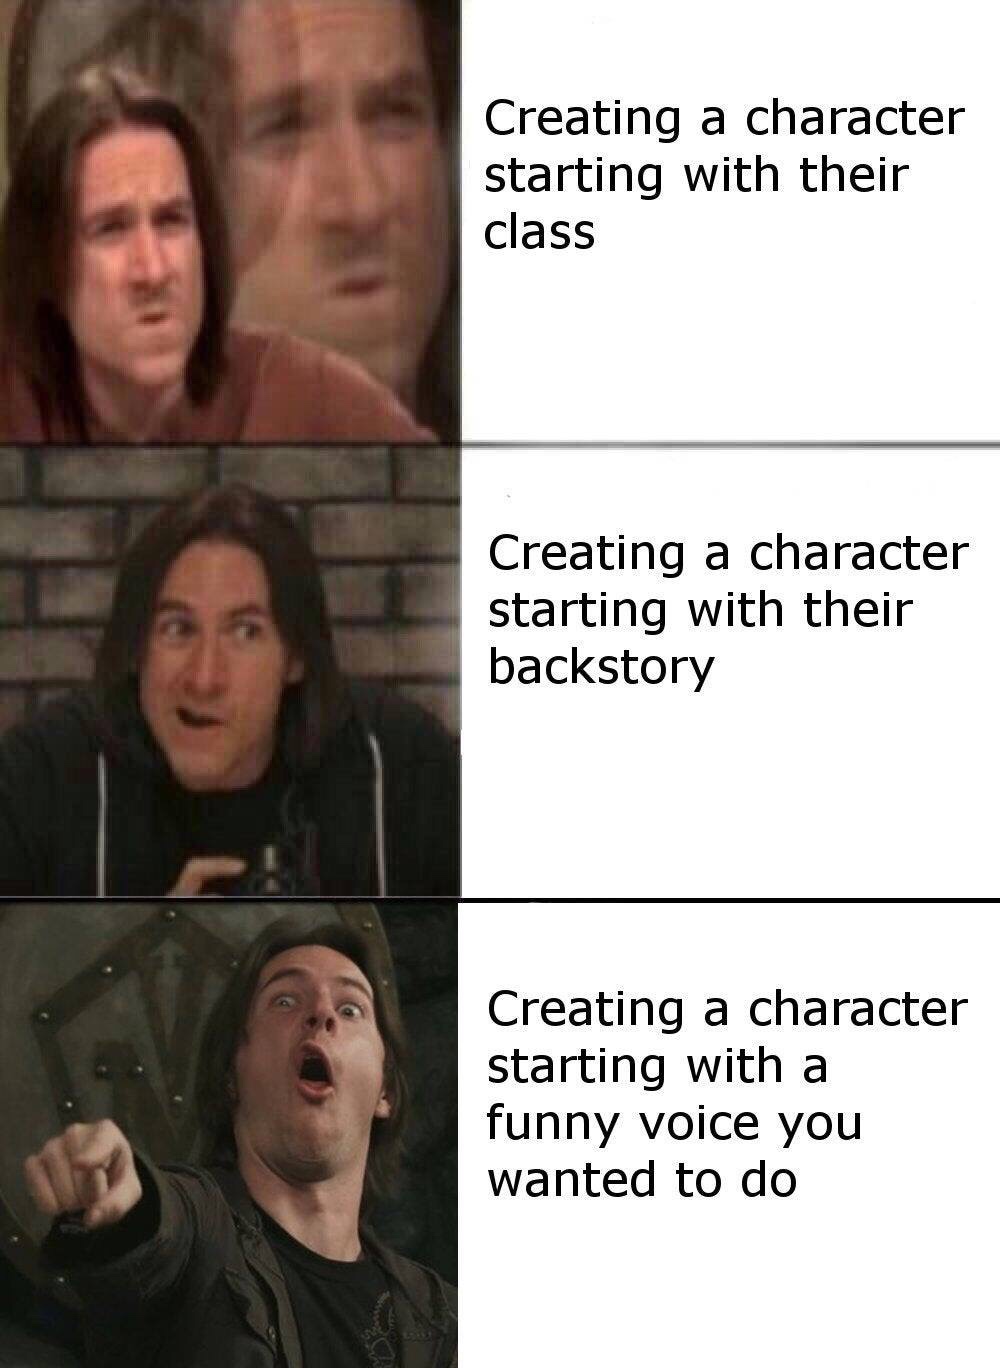 dungeons and dragons - d&d memes reddit - Creating a character starting with their class Creating a character starting with their backstory Creating a character starting with a funny voice you wanted to do